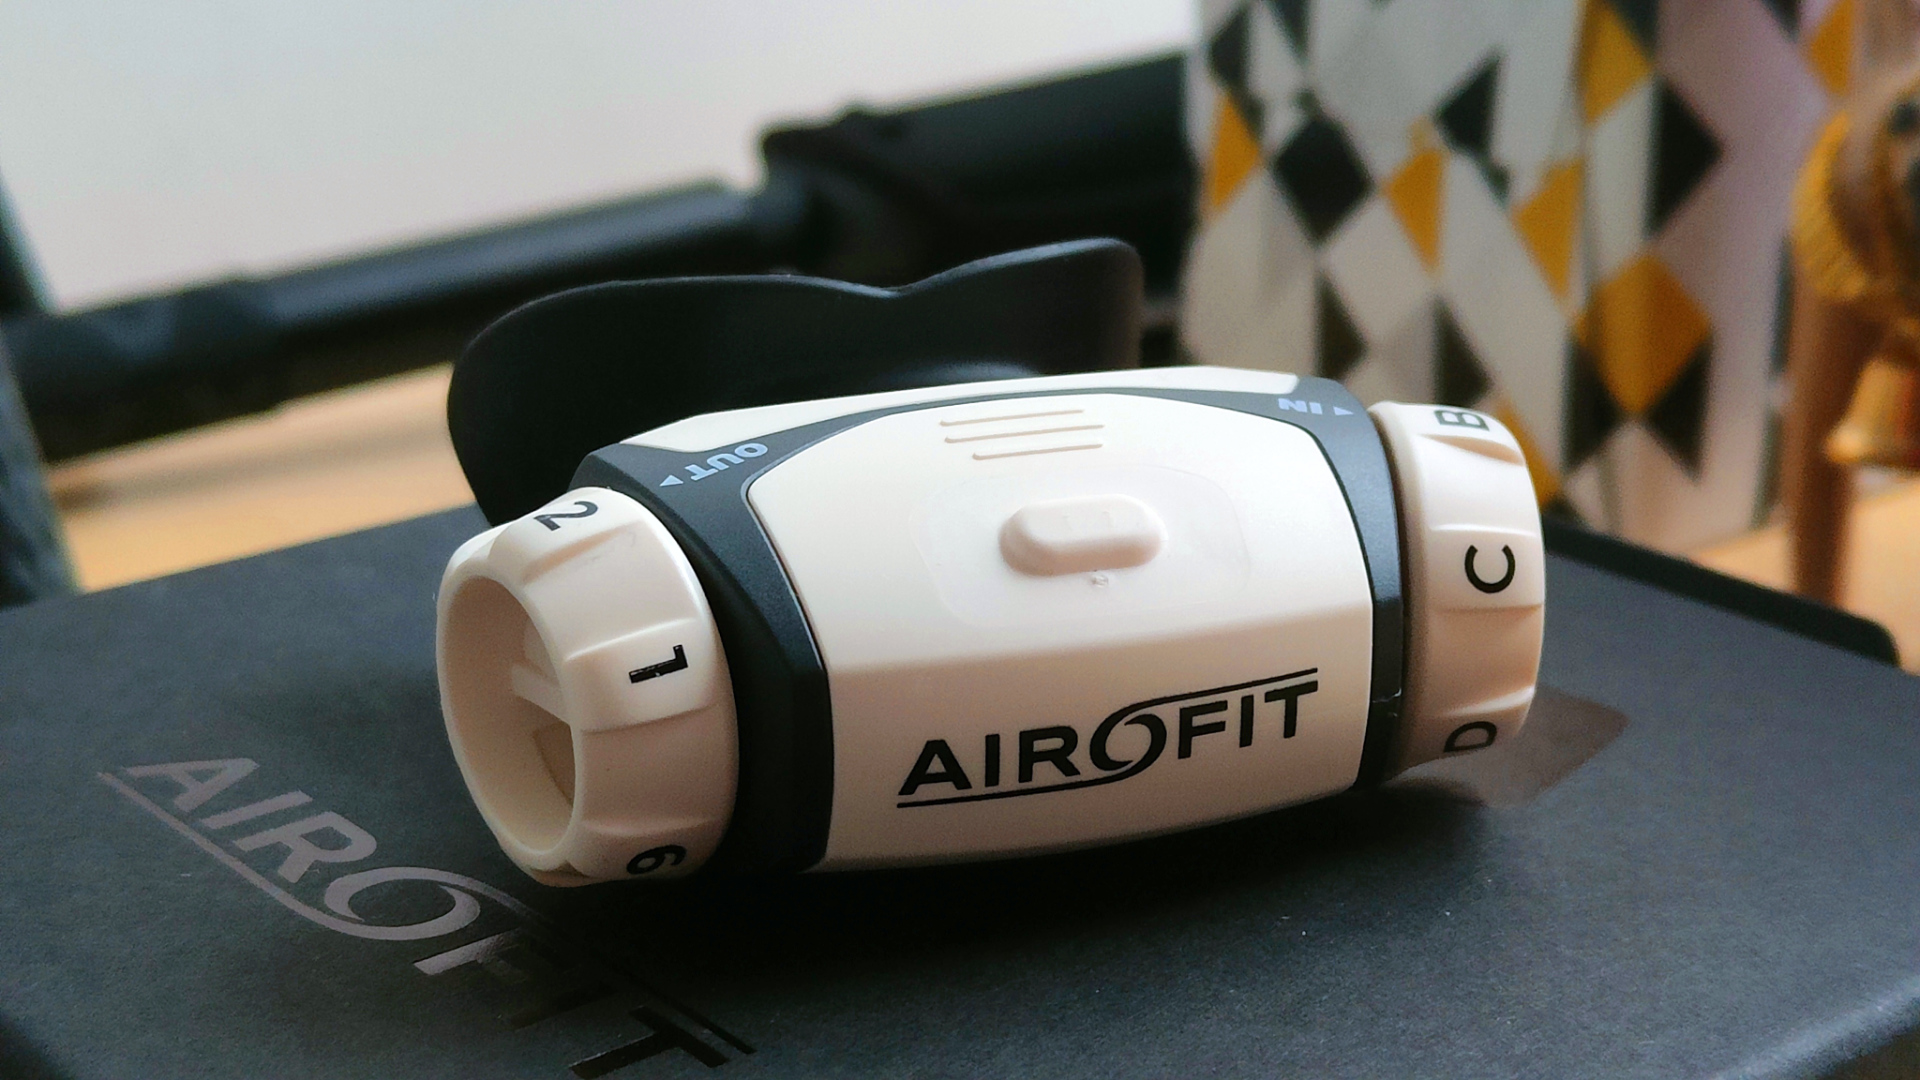 Airofit Respiratory Trainer Review